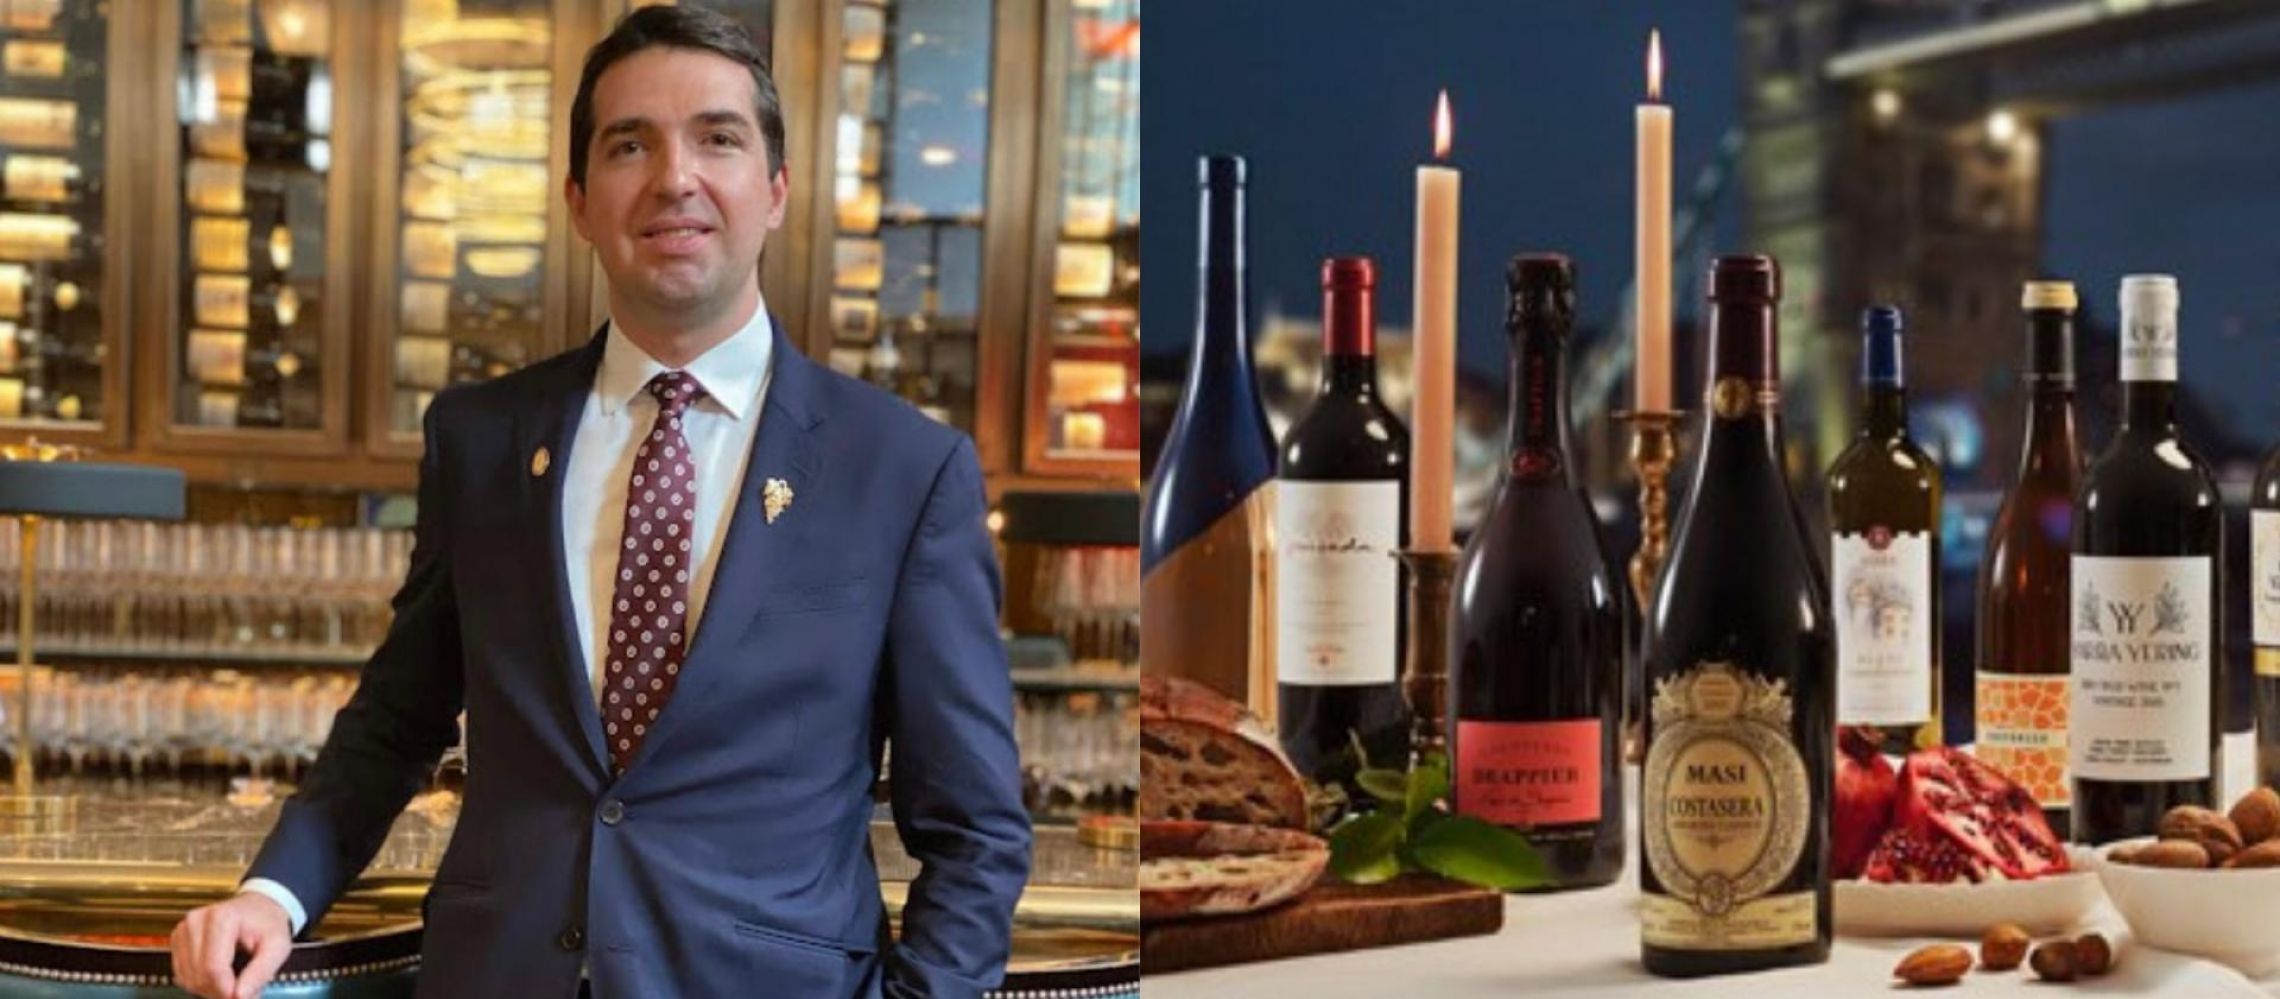 Photo for: Master Sommelier Svetoslav Manolev On Why To Enter In London Wine Competition